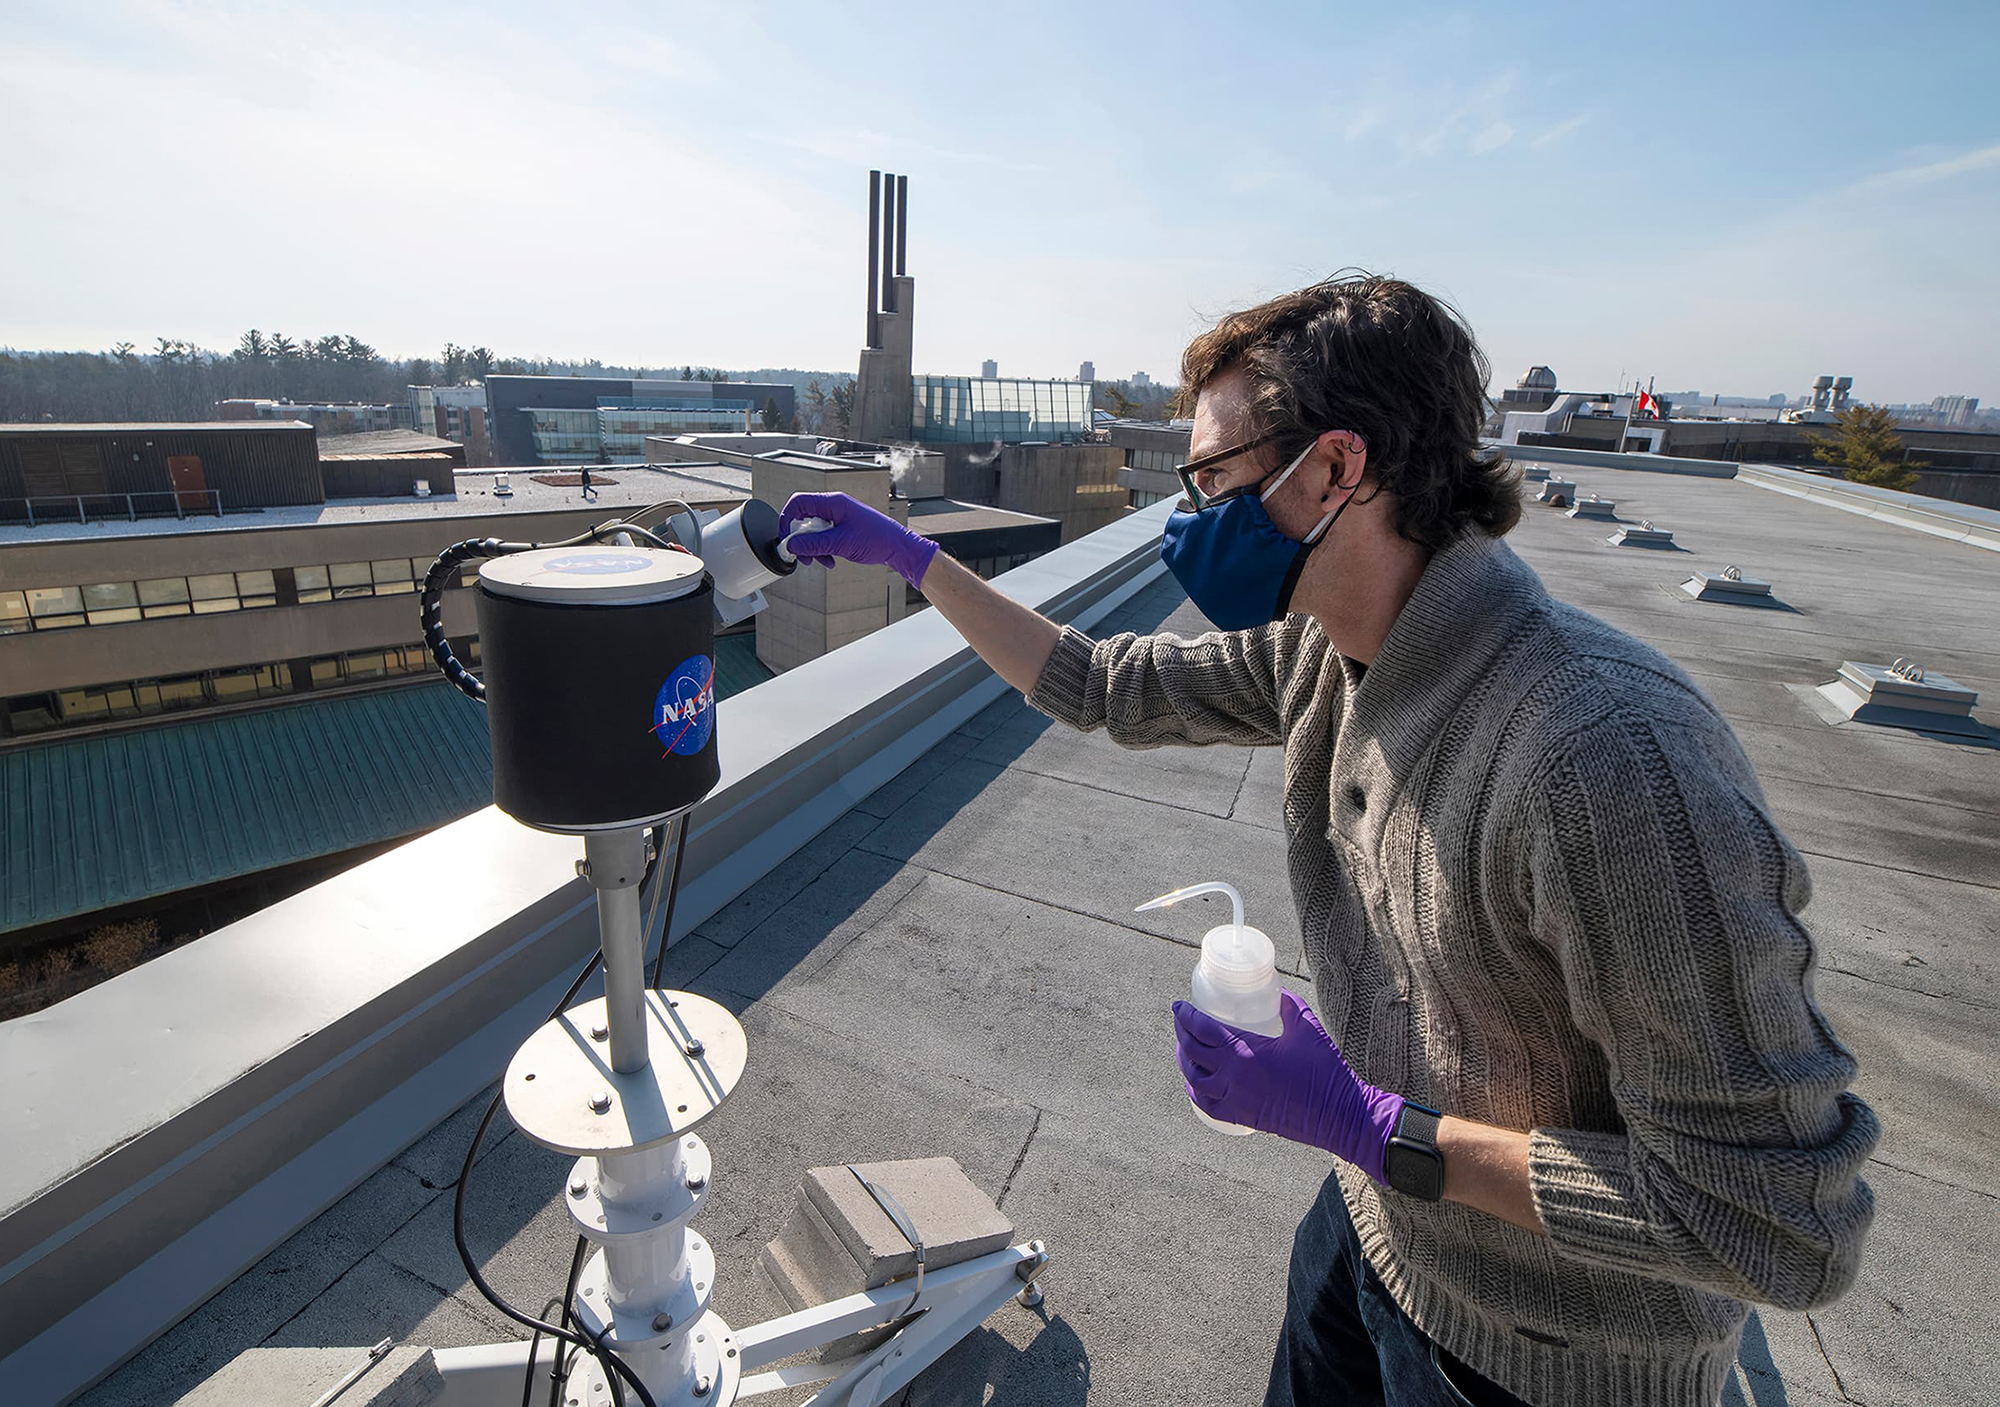 A researcher taking readings from the Pandora Spectrometer System on a rooftop